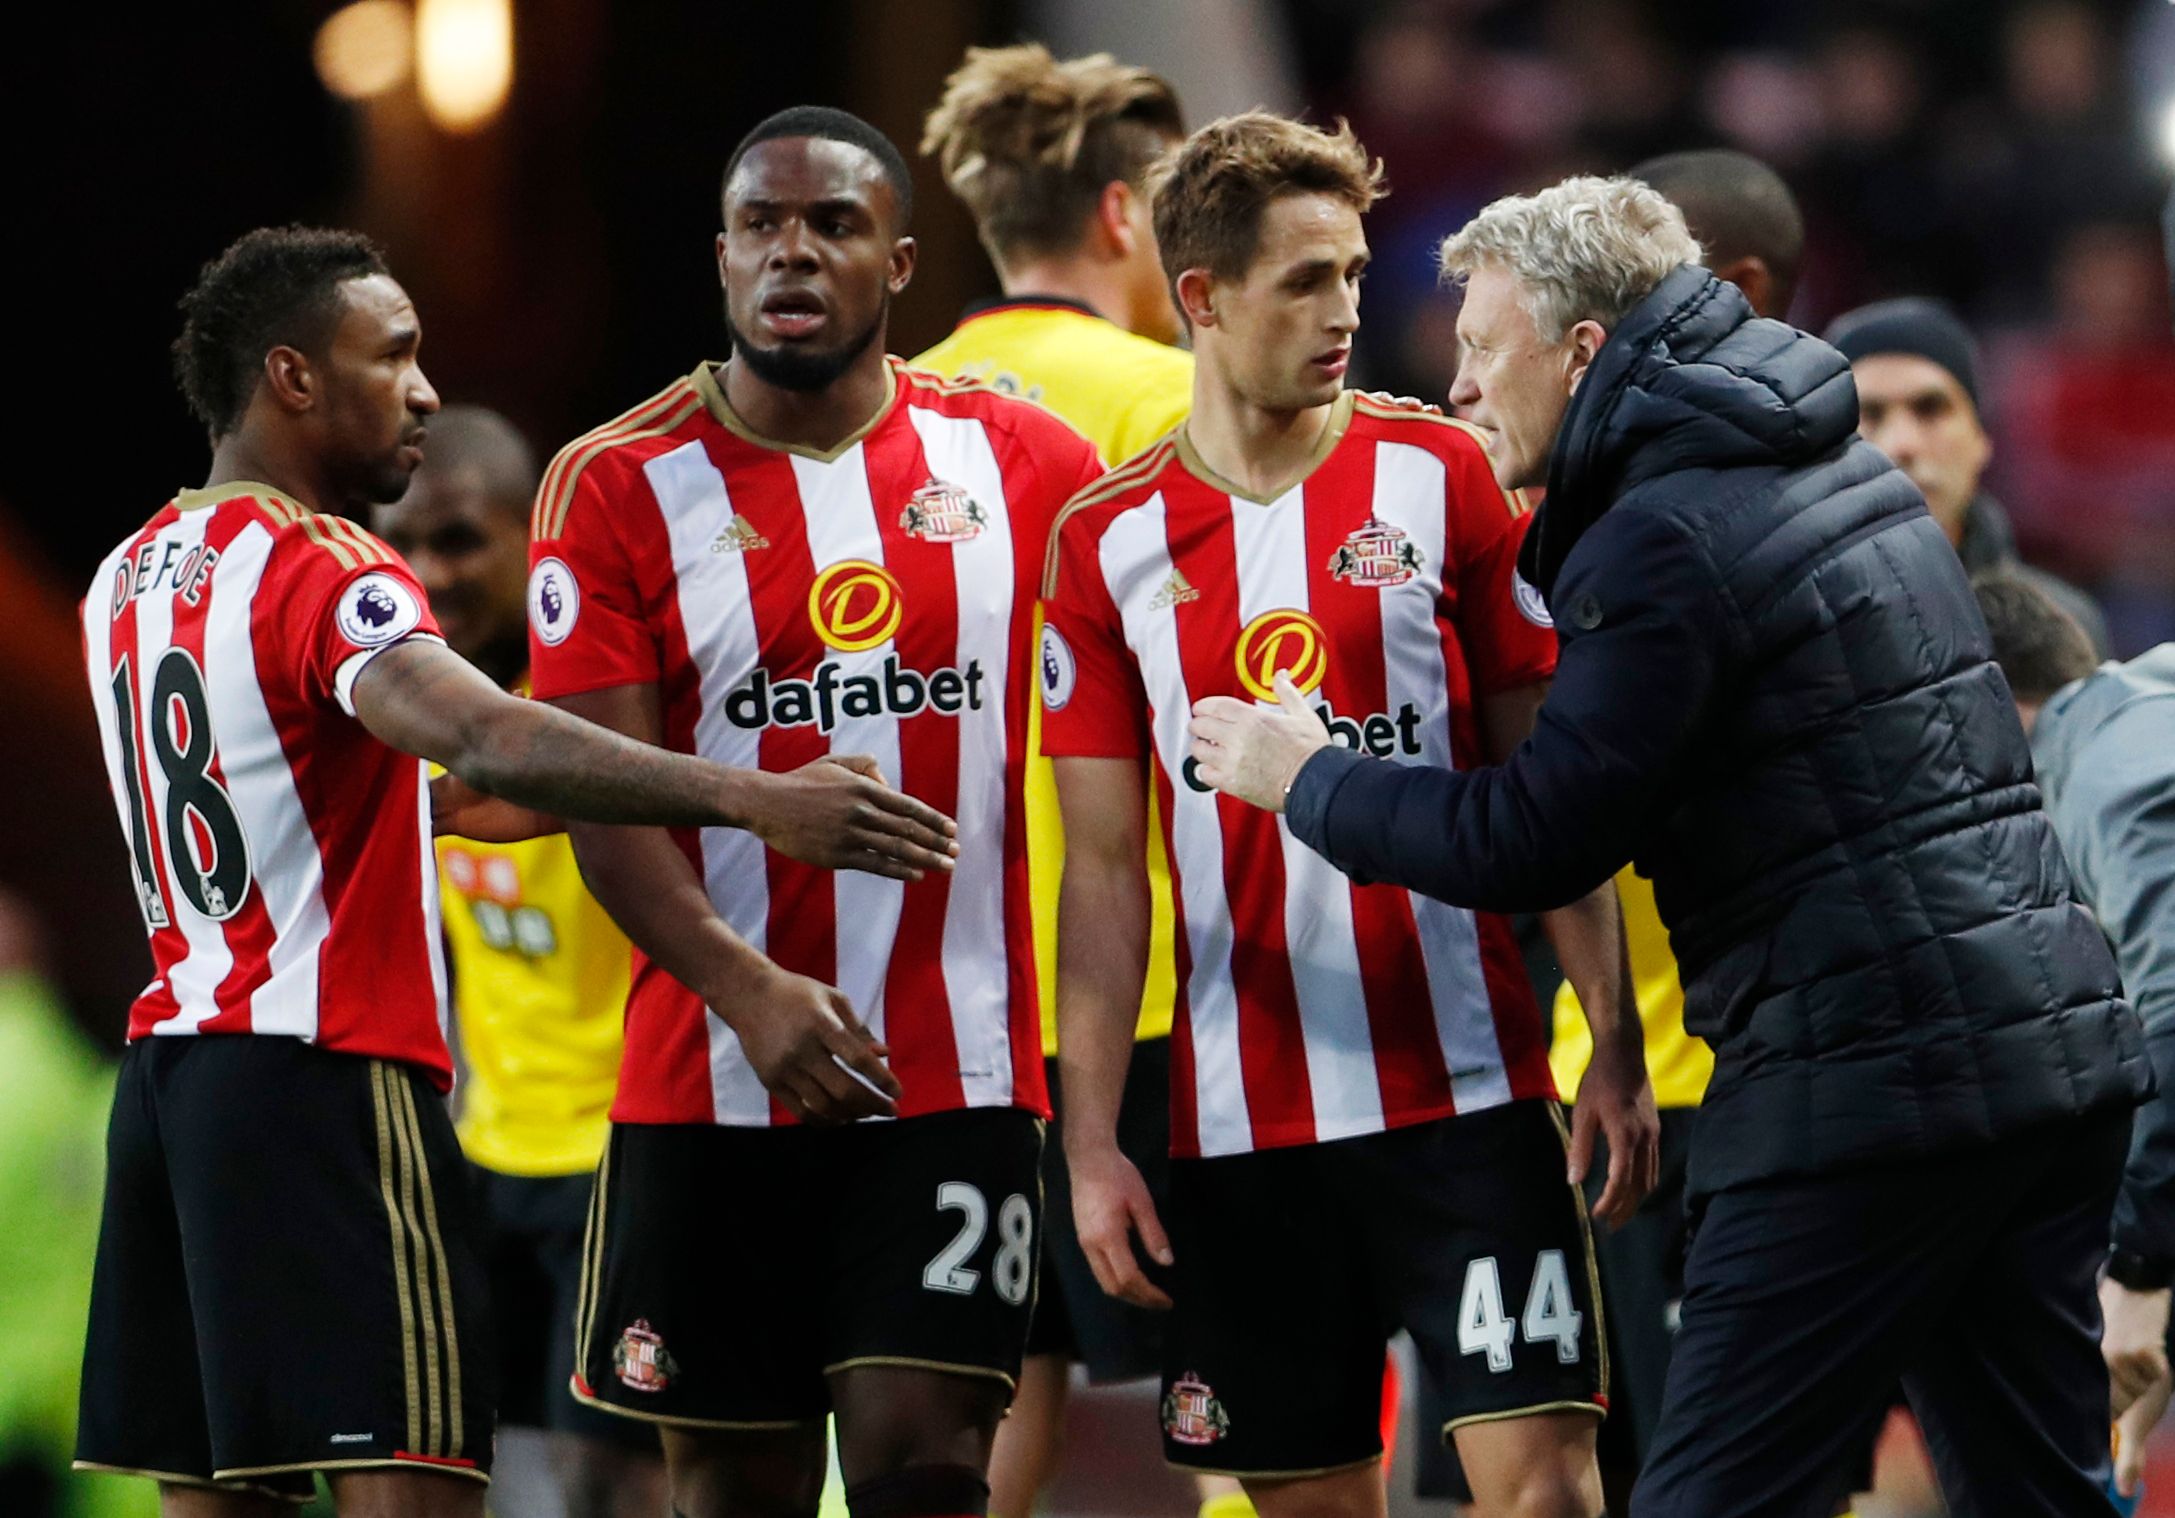 Britain Football Soccer - Sunderland v Watford - Premier League - Stadium of Light - 17/12/16 Sunderland manager David Moyes with Sunderland's Jermain Defoe, Victor Anichebe and Adnan Januzaj  Action Images via Reuters / Lee Smith Livepic EDITORIAL USE ONLY. No use with unauthorized audio, video, data, fixture lists, club/league logos or "live" services. Online in-match use limited to 45 images, no video emulation. No use in betting, games or single club/league/player publications. Please contac